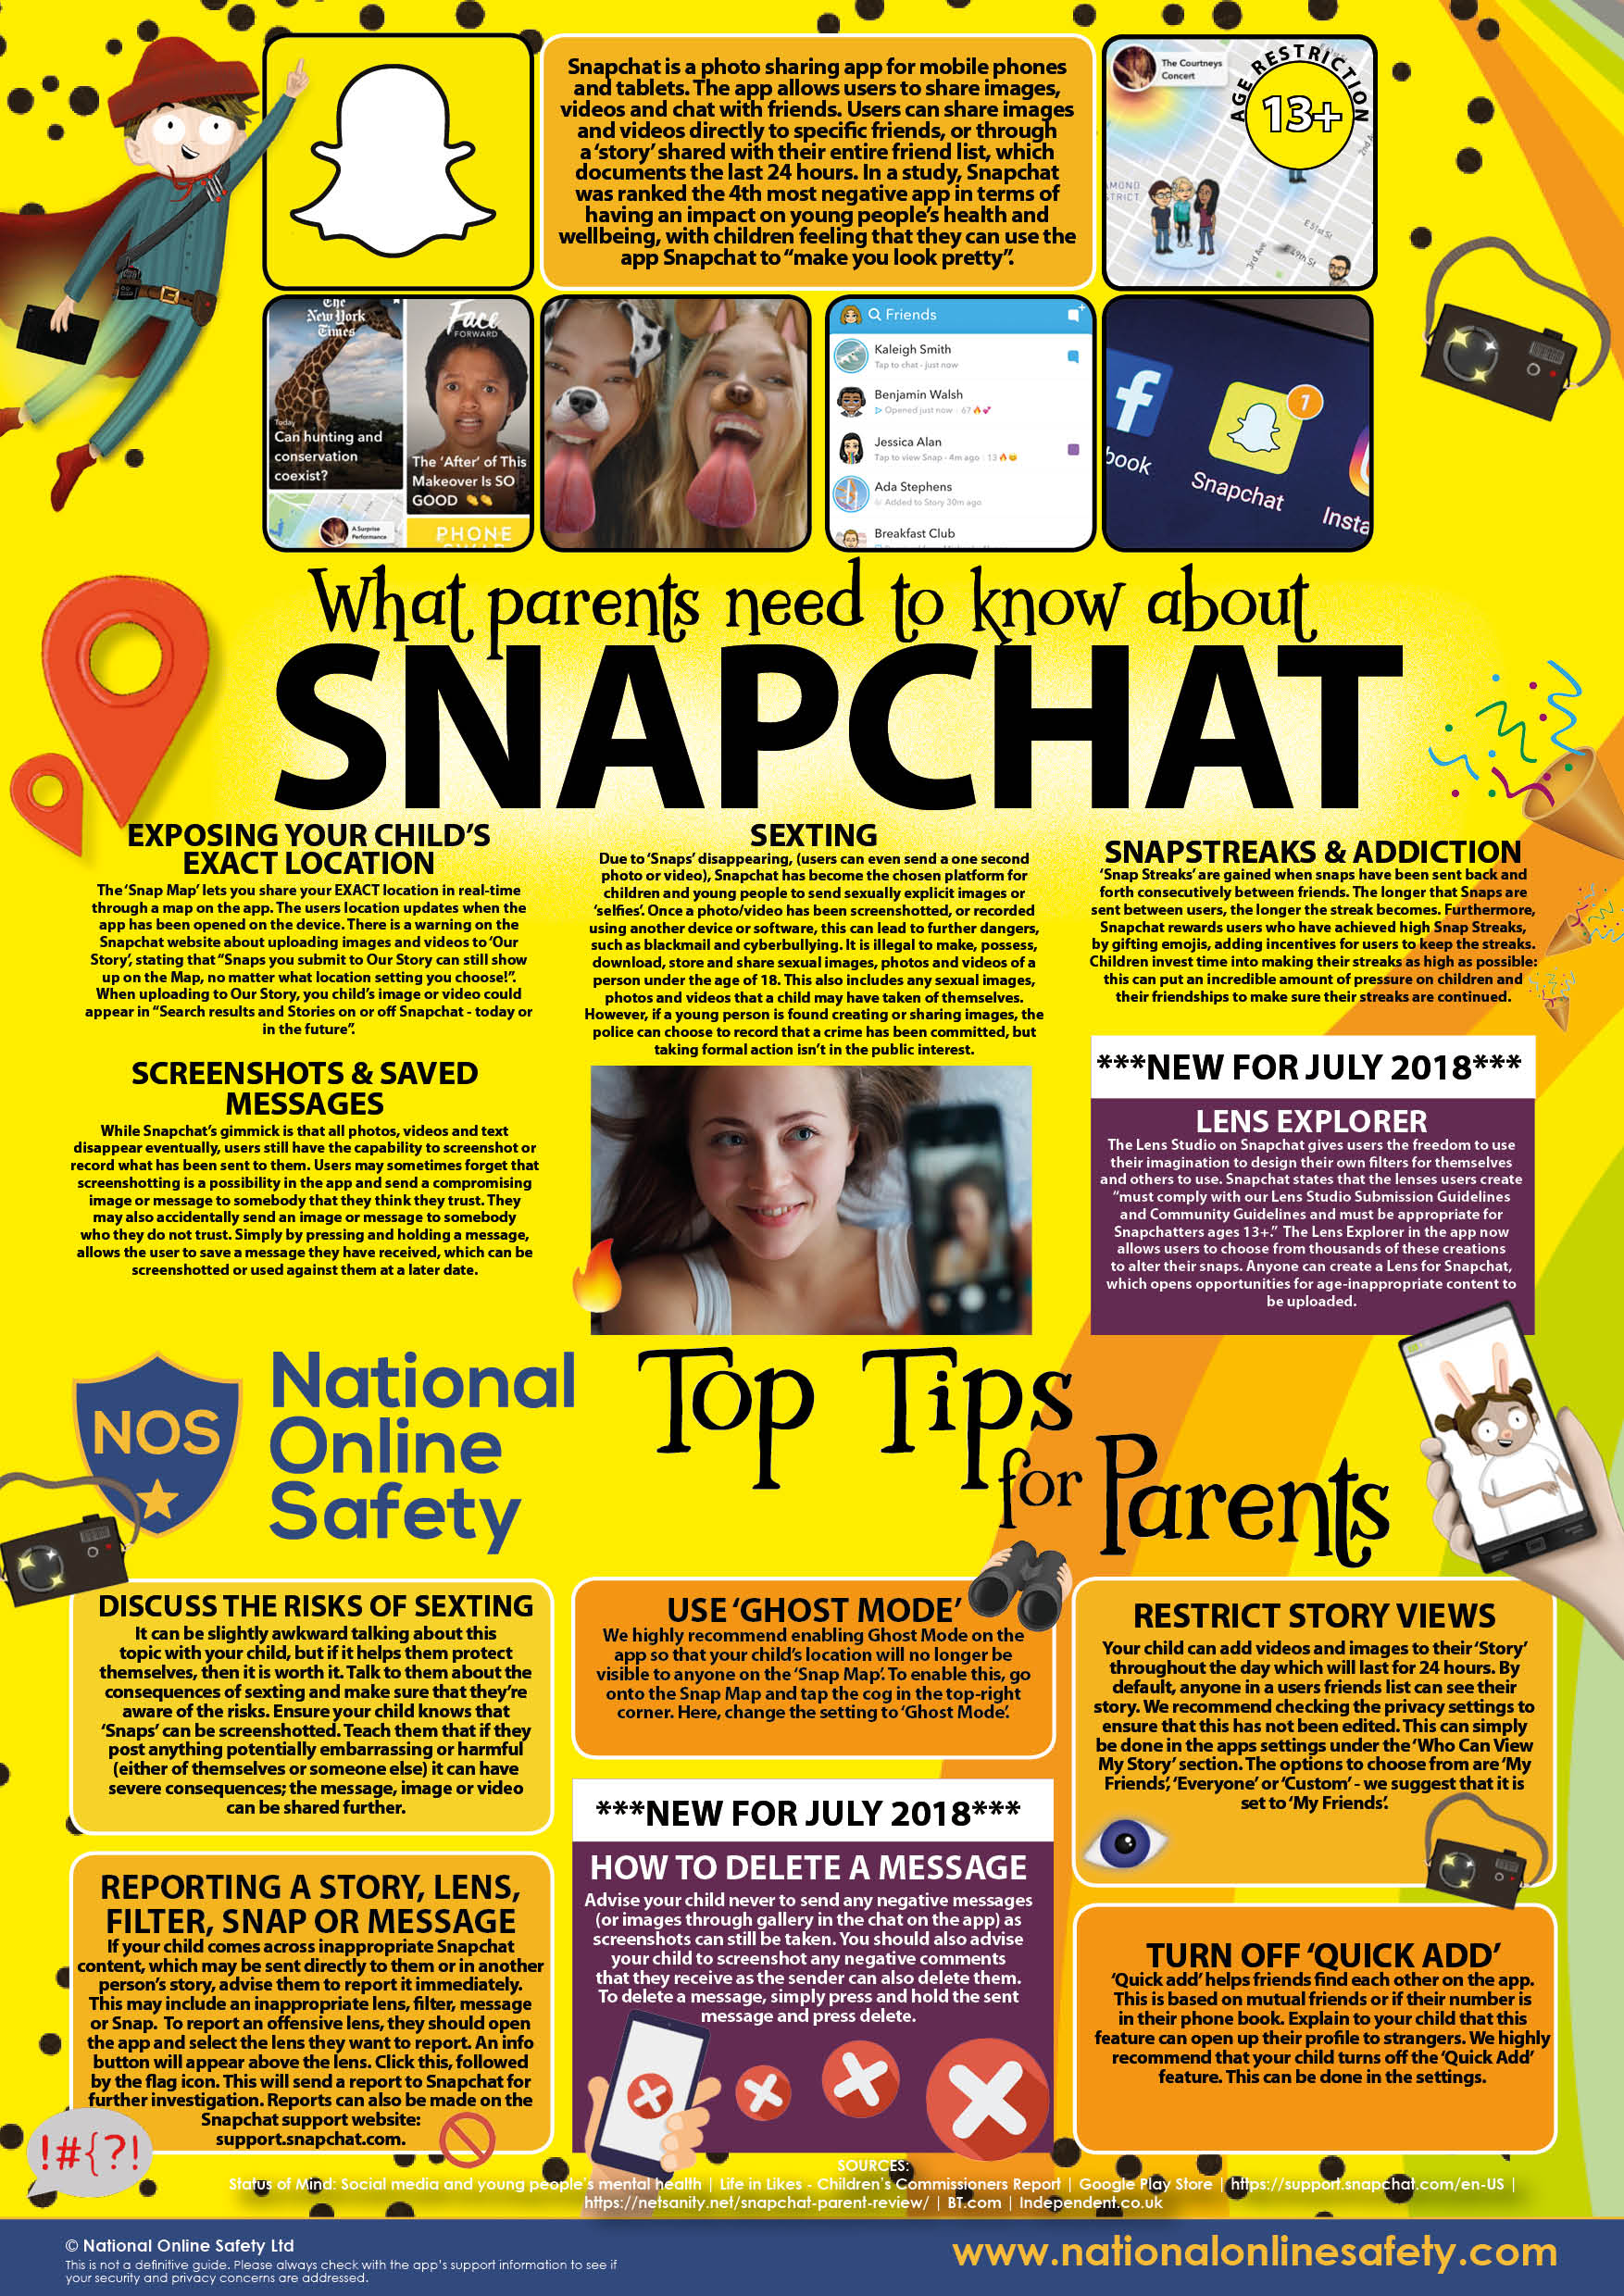 Parents-Snapchat-Guide-National-Online-Safety-July-Update-2018.jpg